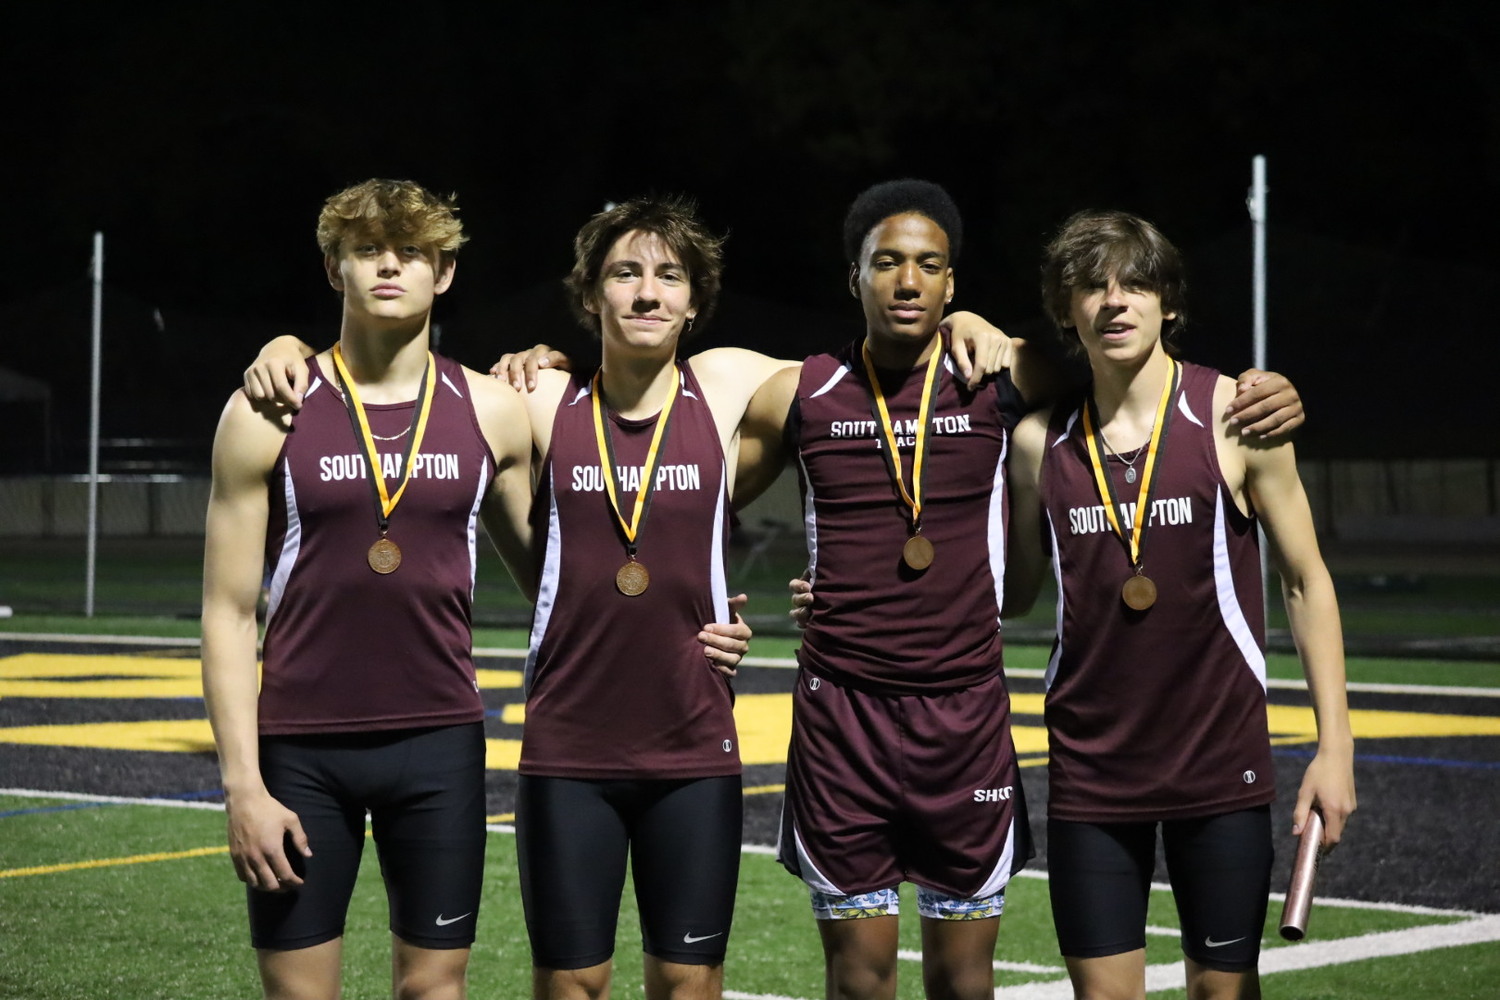 Southampton boys 4x100-meter relay team of Hudson Fox, Jett De Sane, Davon Palmore and Tanner Morro placed sixth at the St. Anthony's Invitational on Saturday.    JAMIE CARLSEN-DE SANE